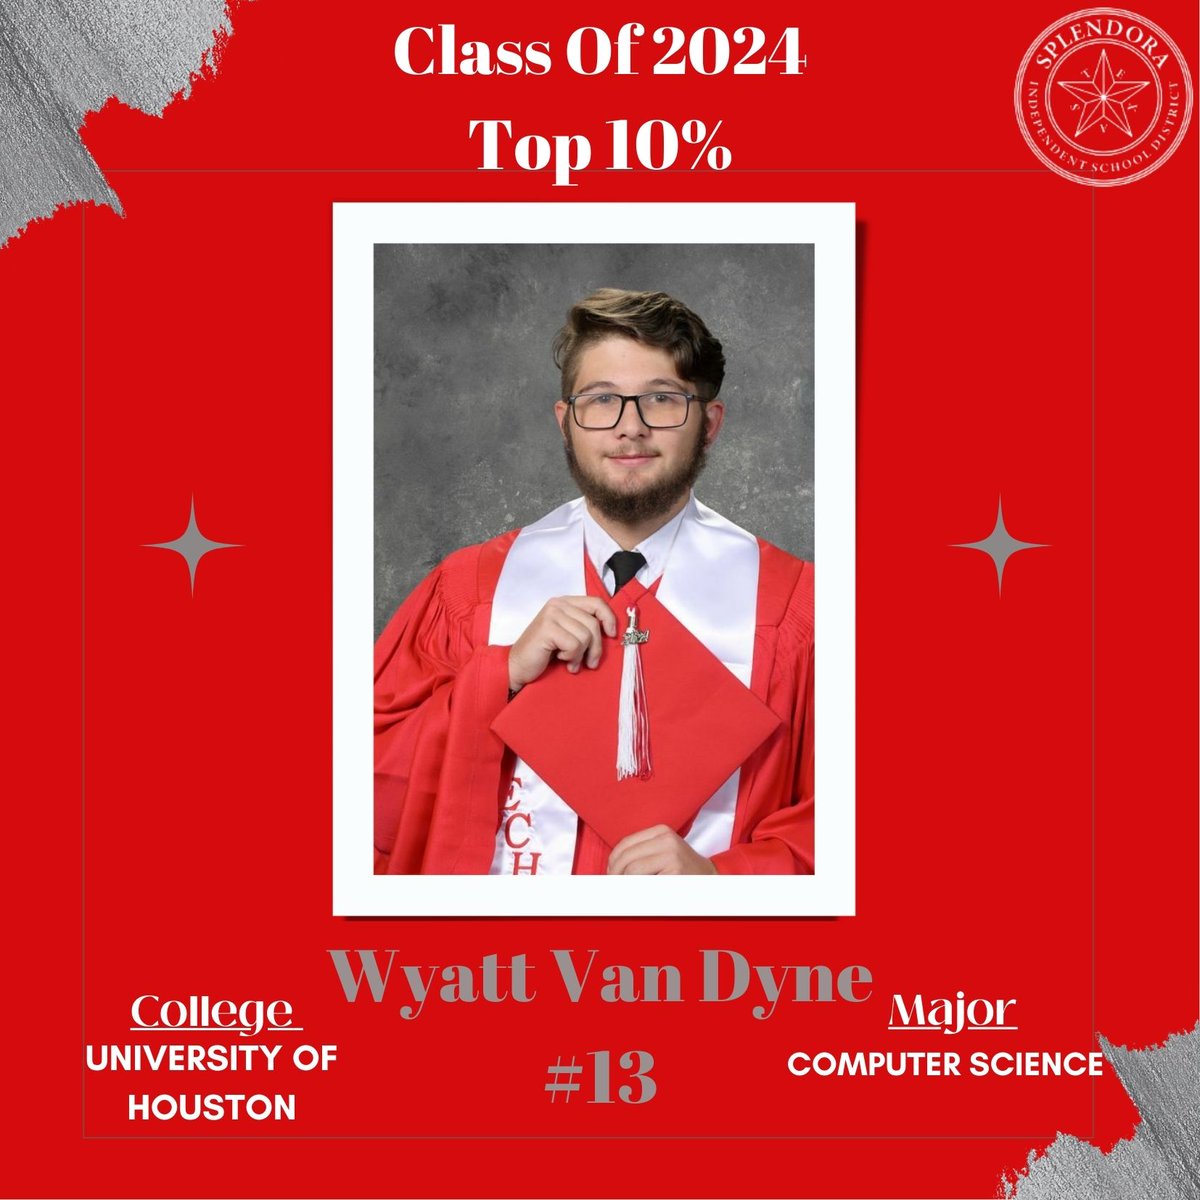 We would like to congratulate each student in the top 10 percent of the graduating 2024 class. We are very proud of their academic accomplishments. We will be counting down each day to celebrate each of our students' success. Congratulations, Wyatt Van Dyne - #13